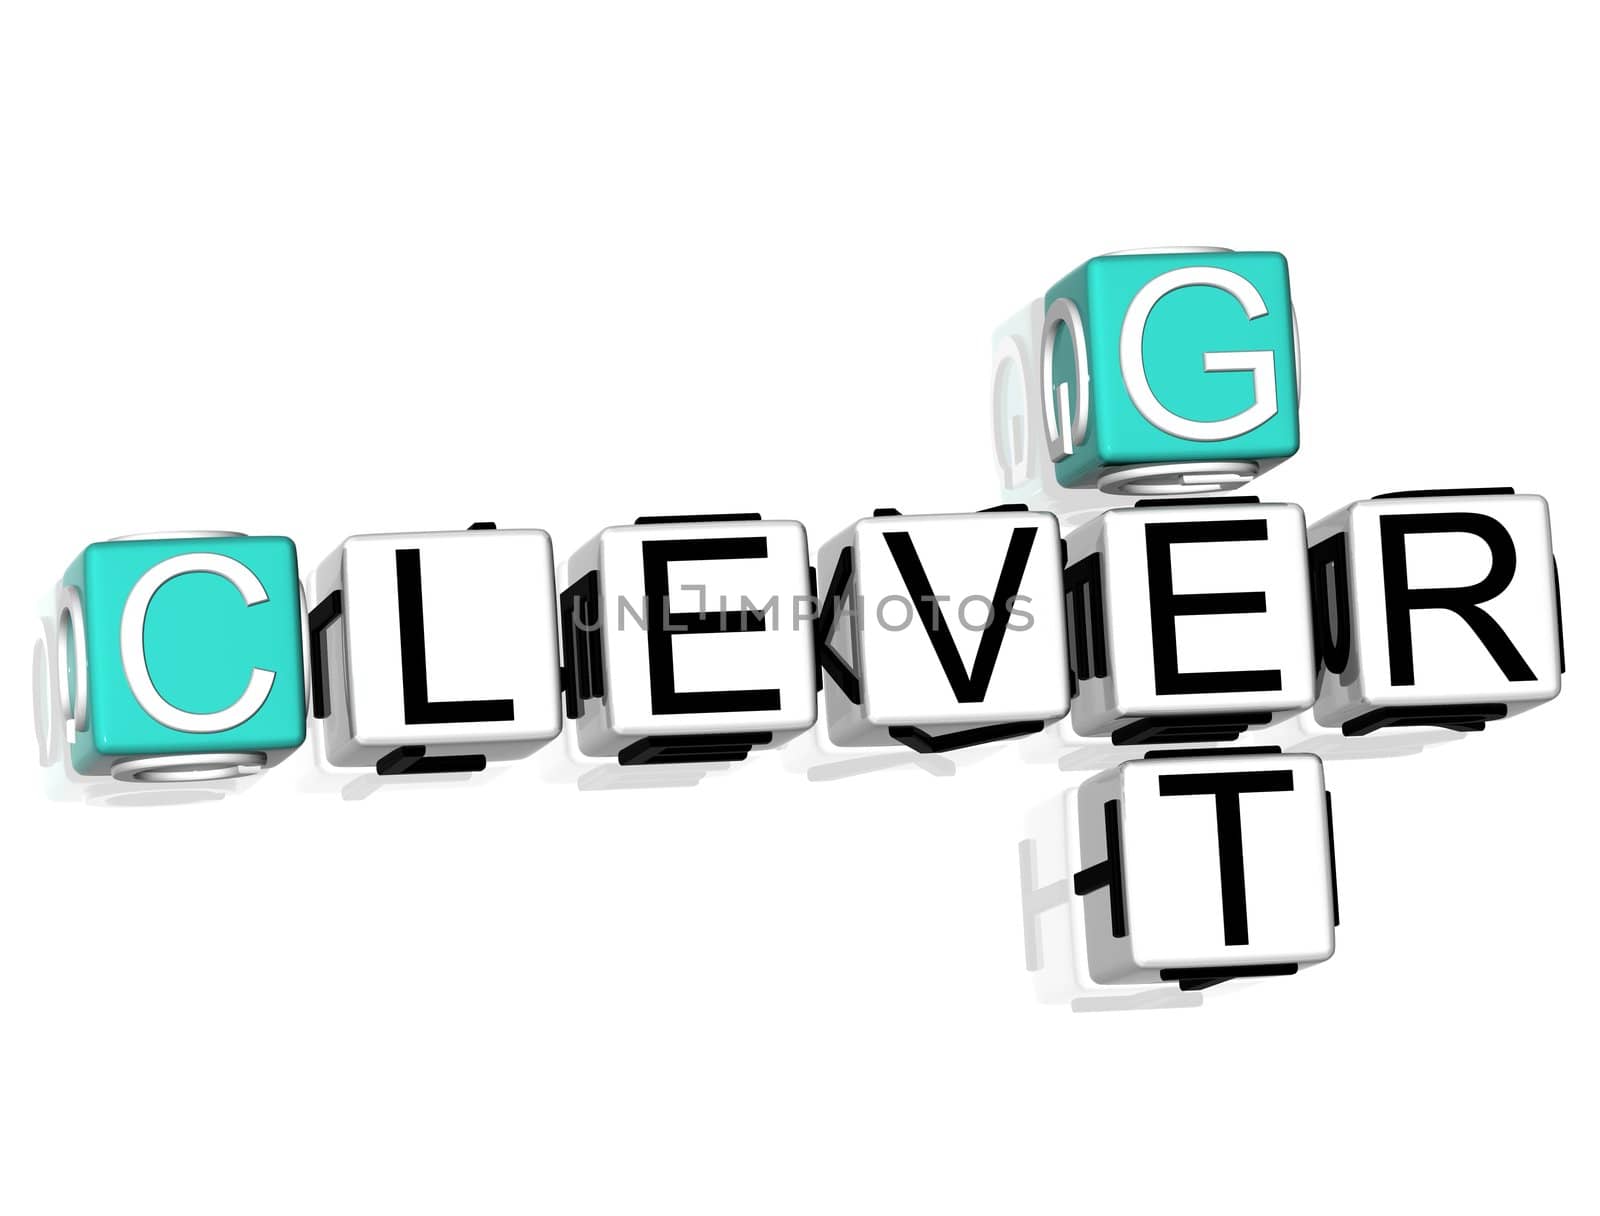 3D Get Clever Crossword on white background